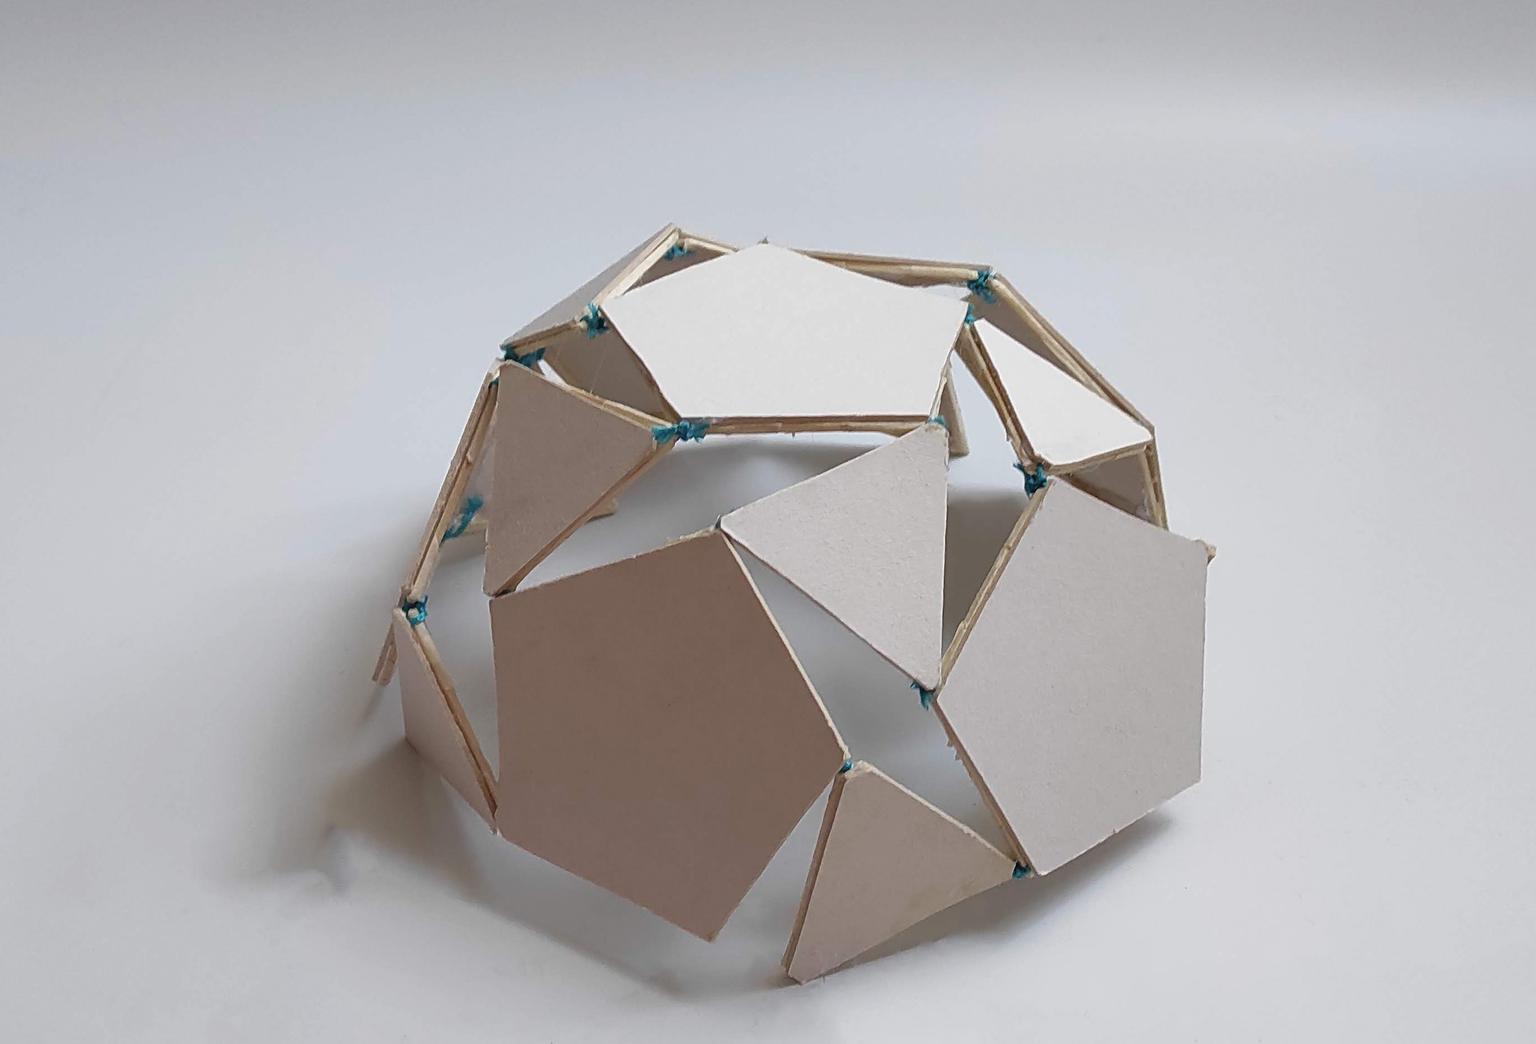 Image for entry 'Dynamic Tiling for Geodesic Dome'